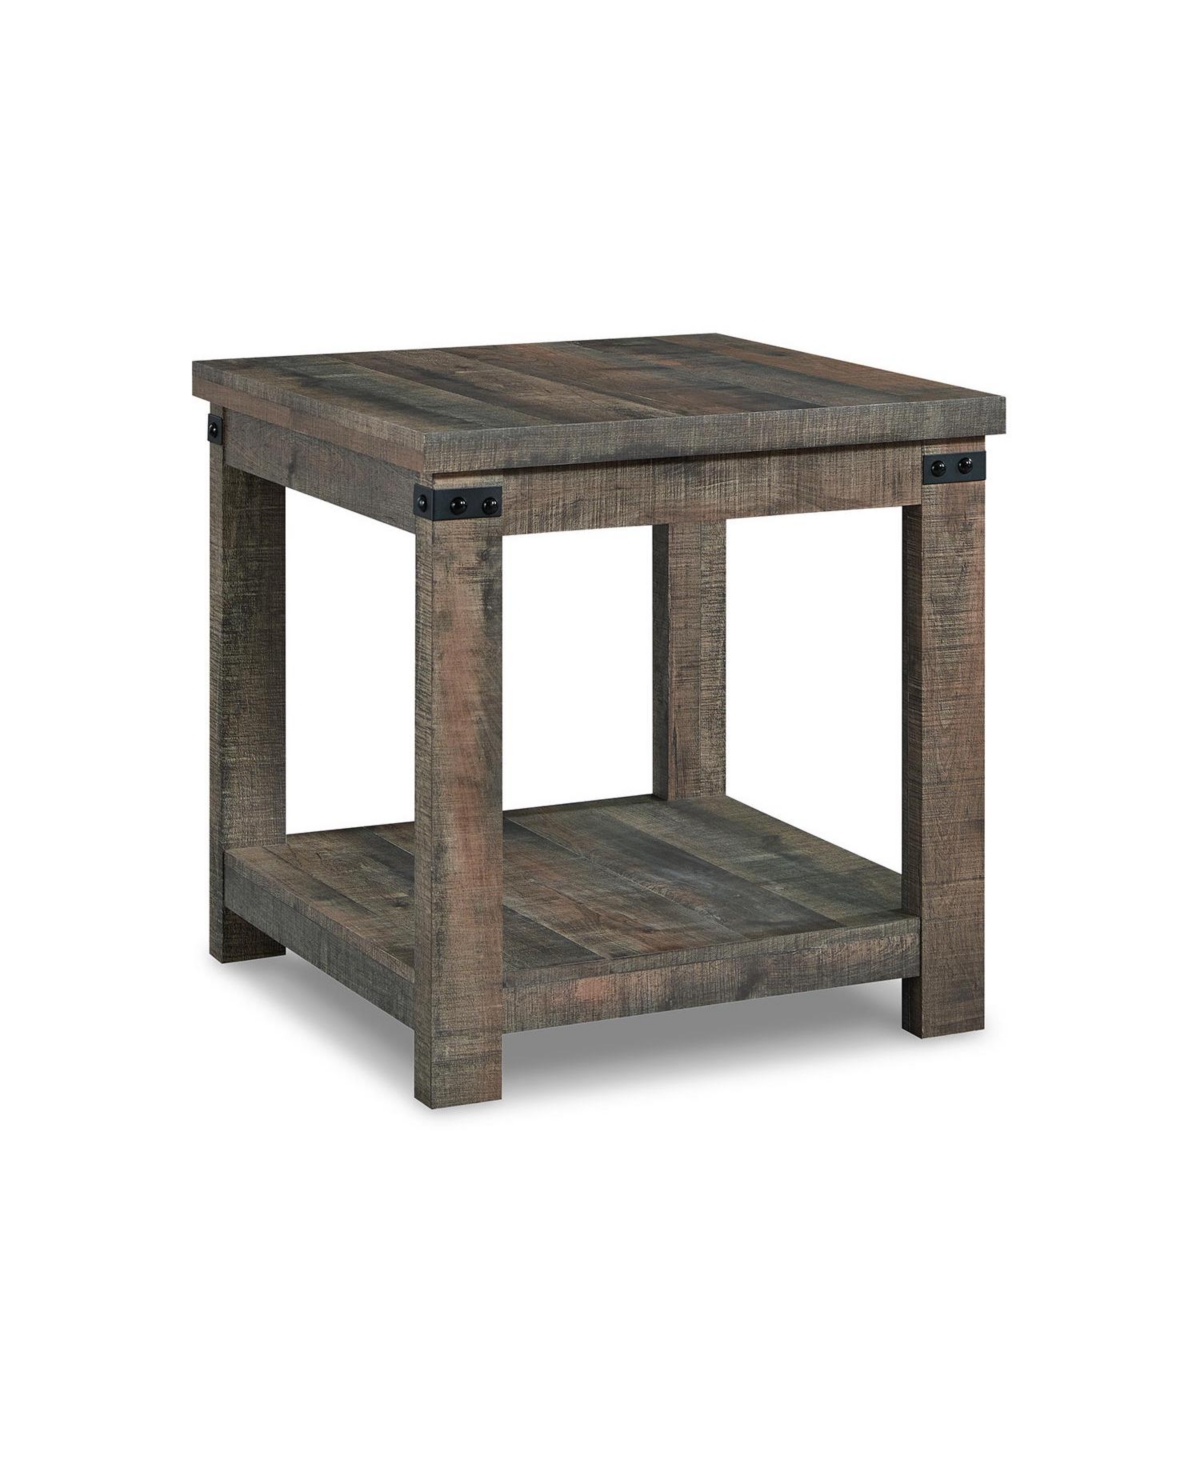 Signature Design By Ashley Hollum Square End Table In Rustic Brown